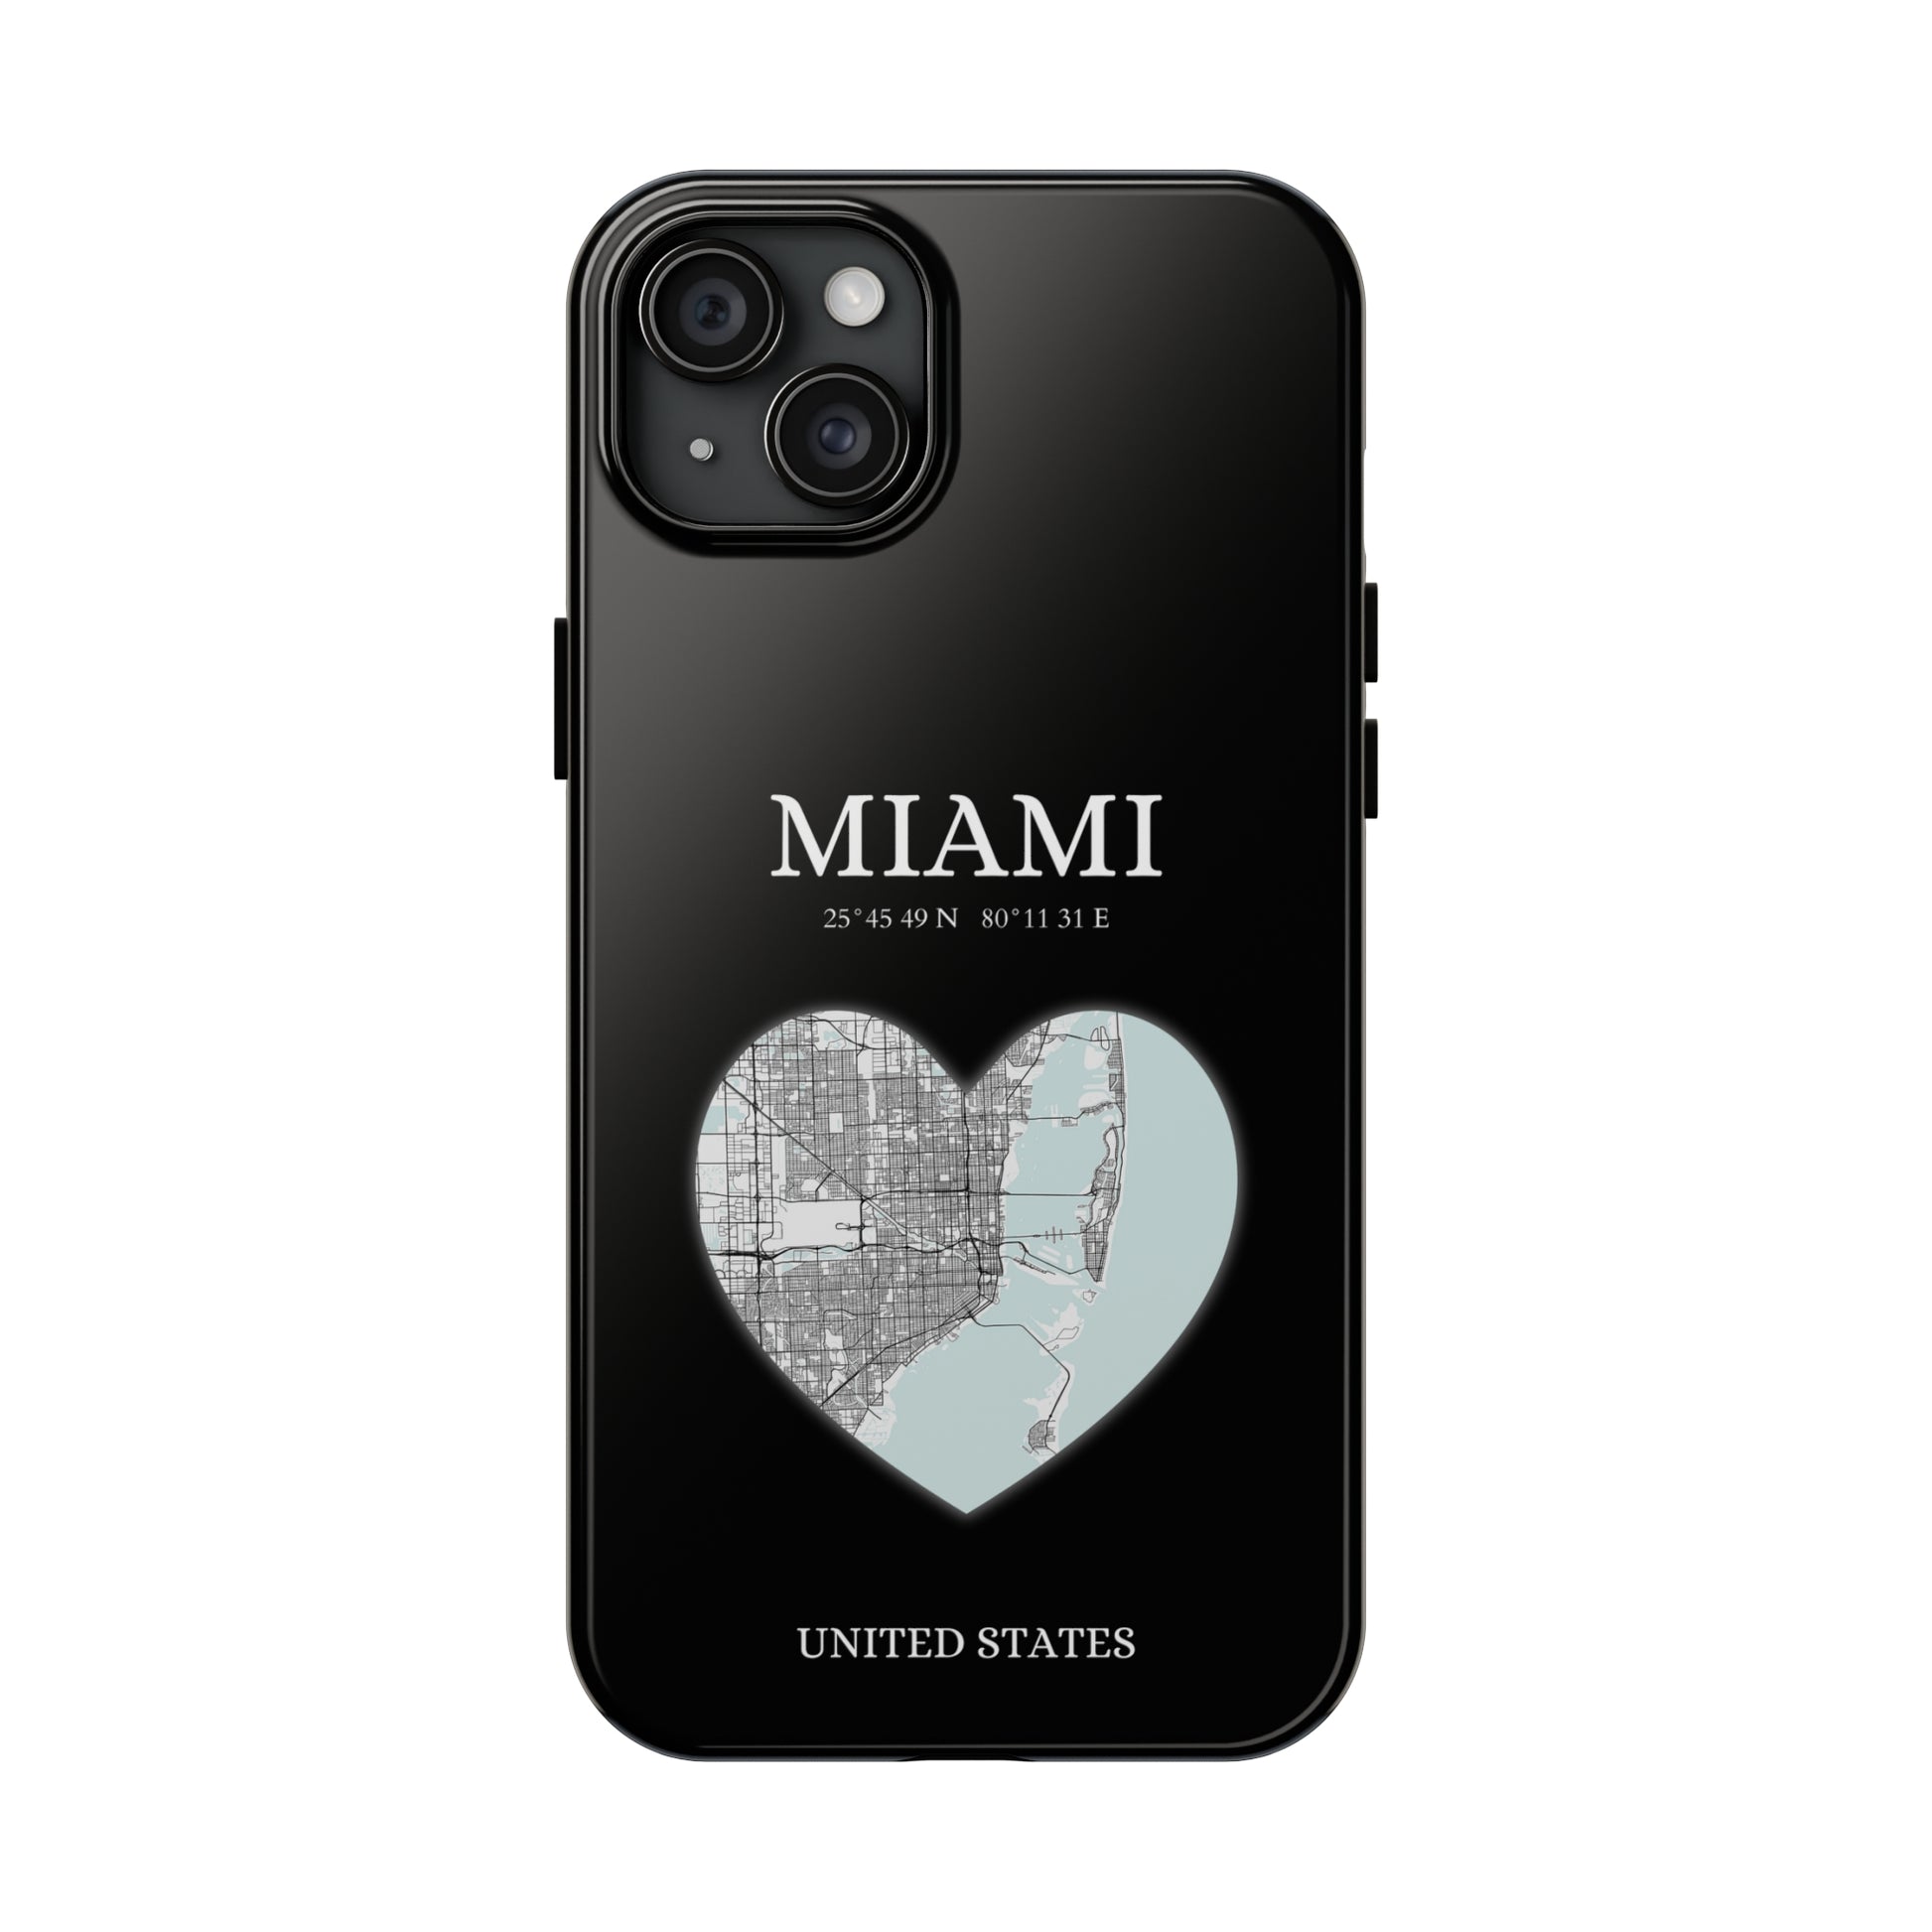 Miami Heartbeat - Black (iPhone Case 11-15)Elevate your iPhone's style with Rima's Miami Heartbeat case. Sleek, durable protection for models 11-15. Free US shipping.RimaGallery